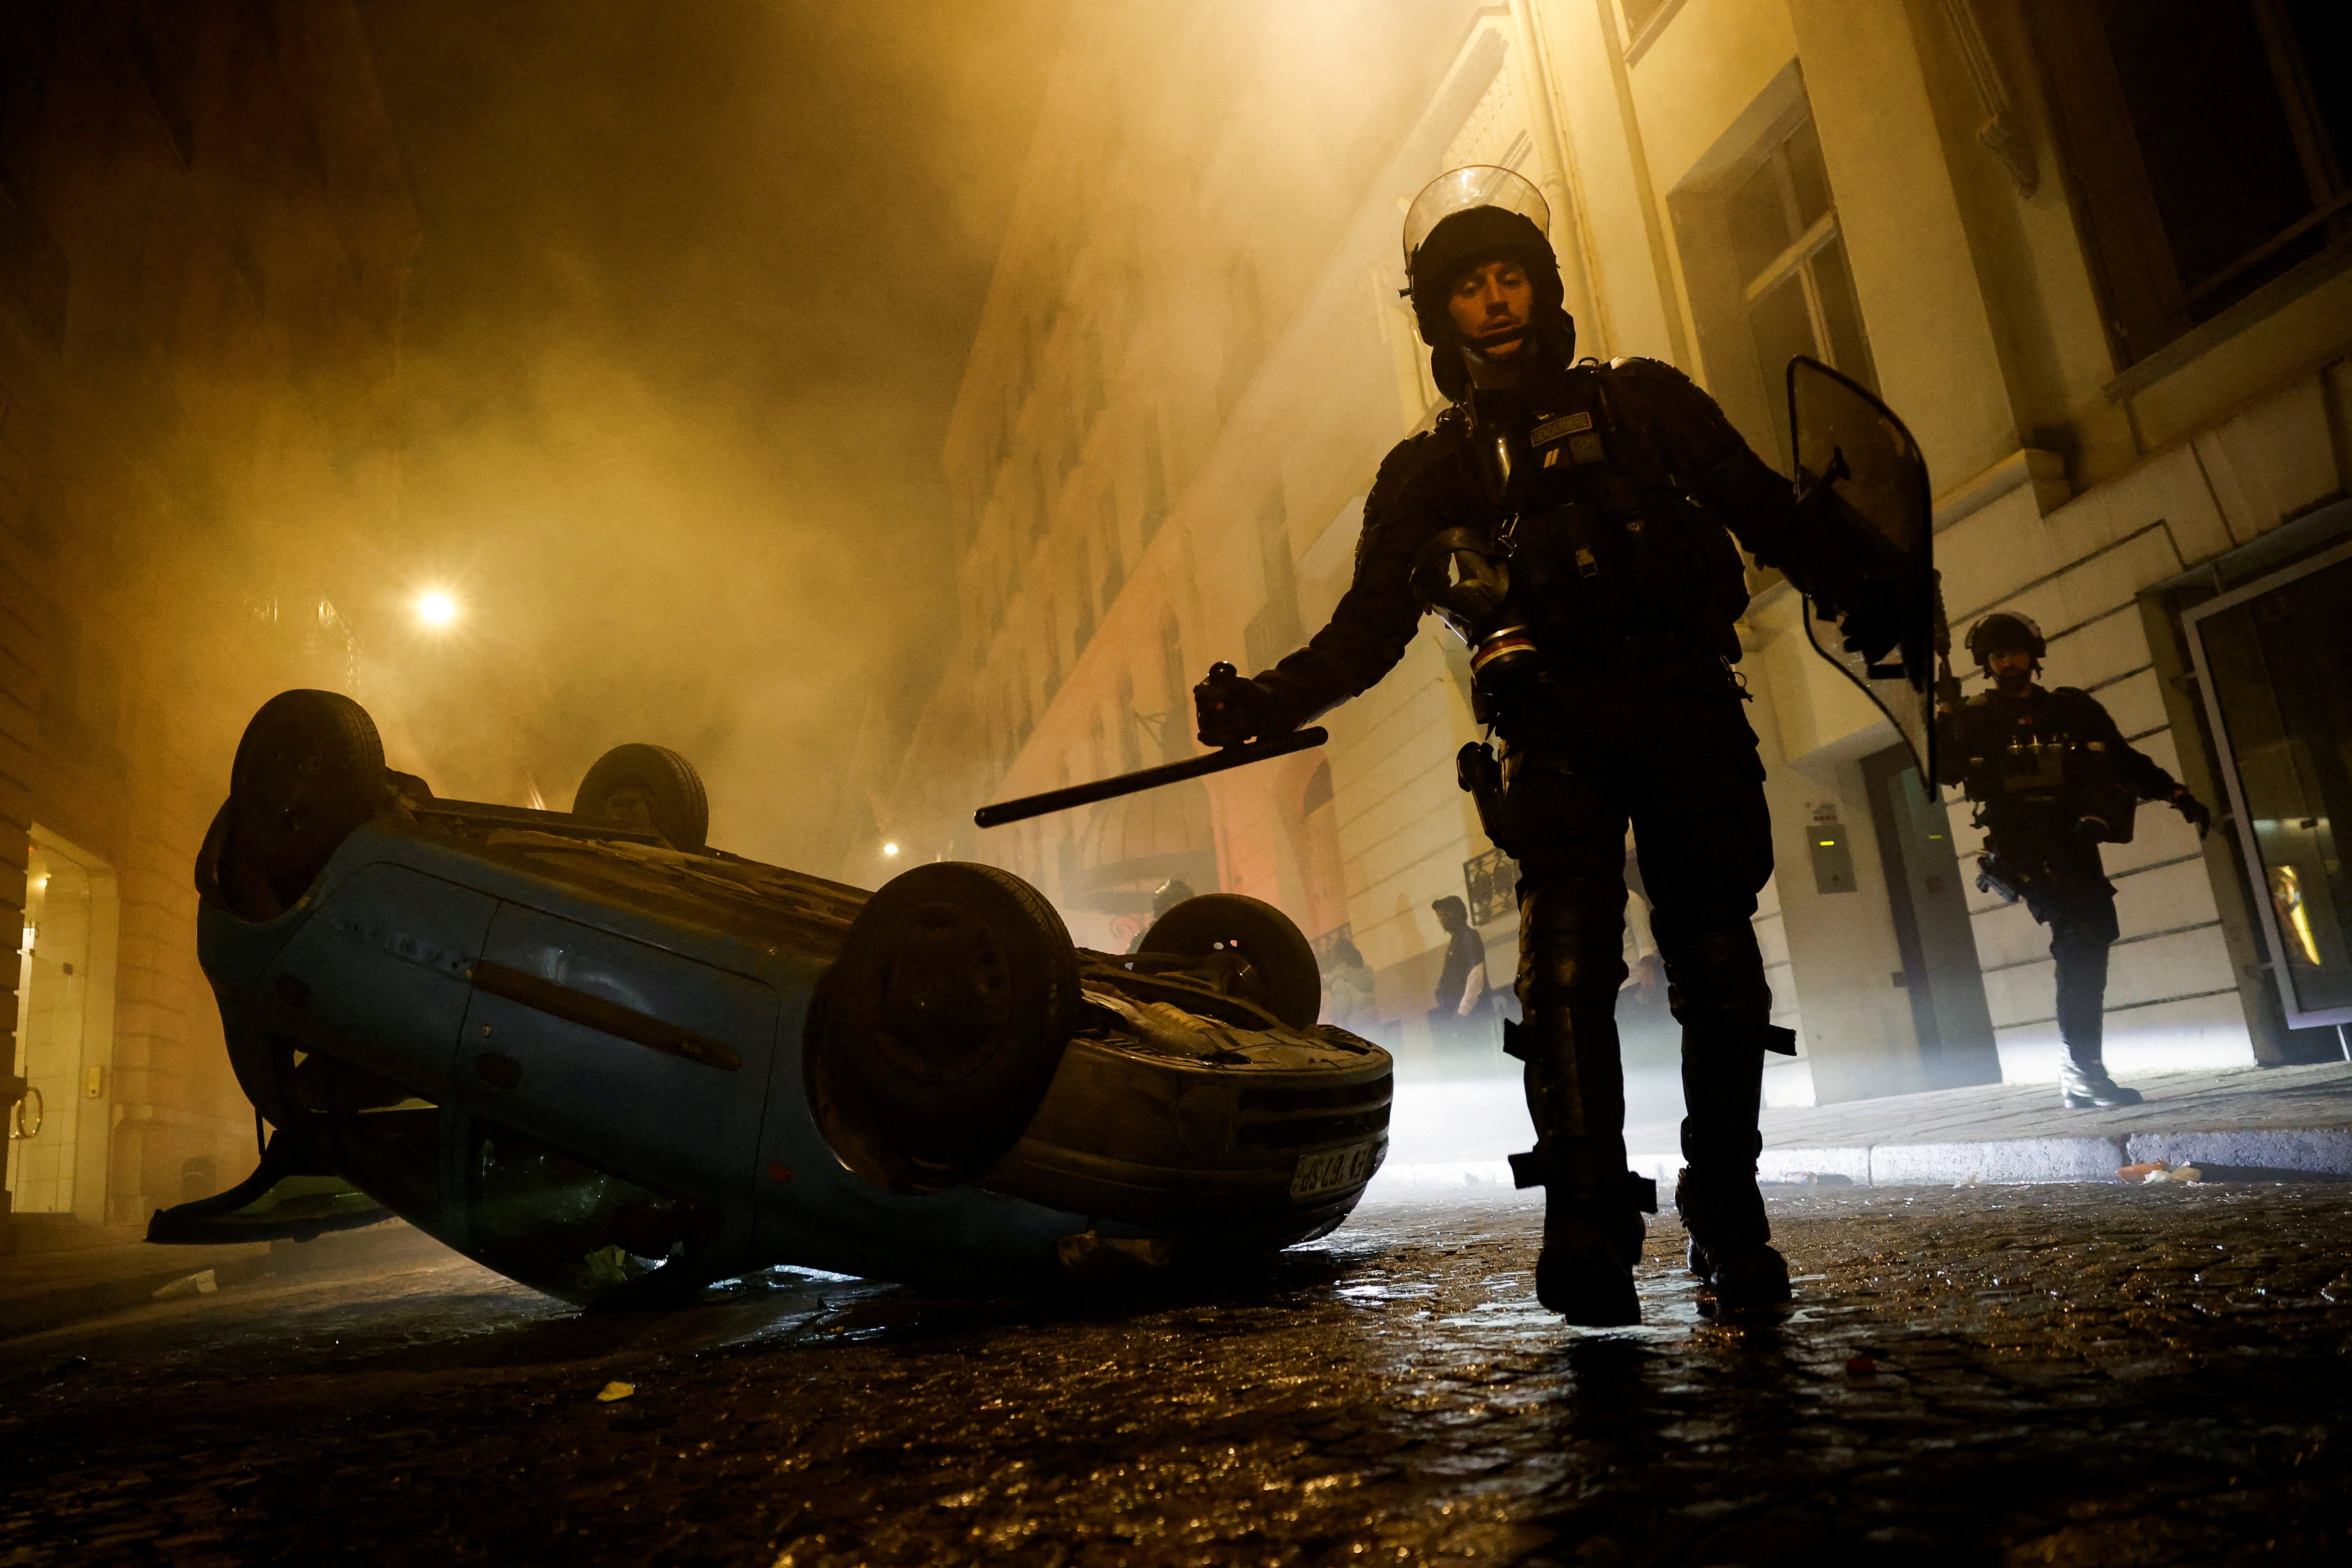 French riot police officers walk next to a vehicle upside down during the fifth day of protests